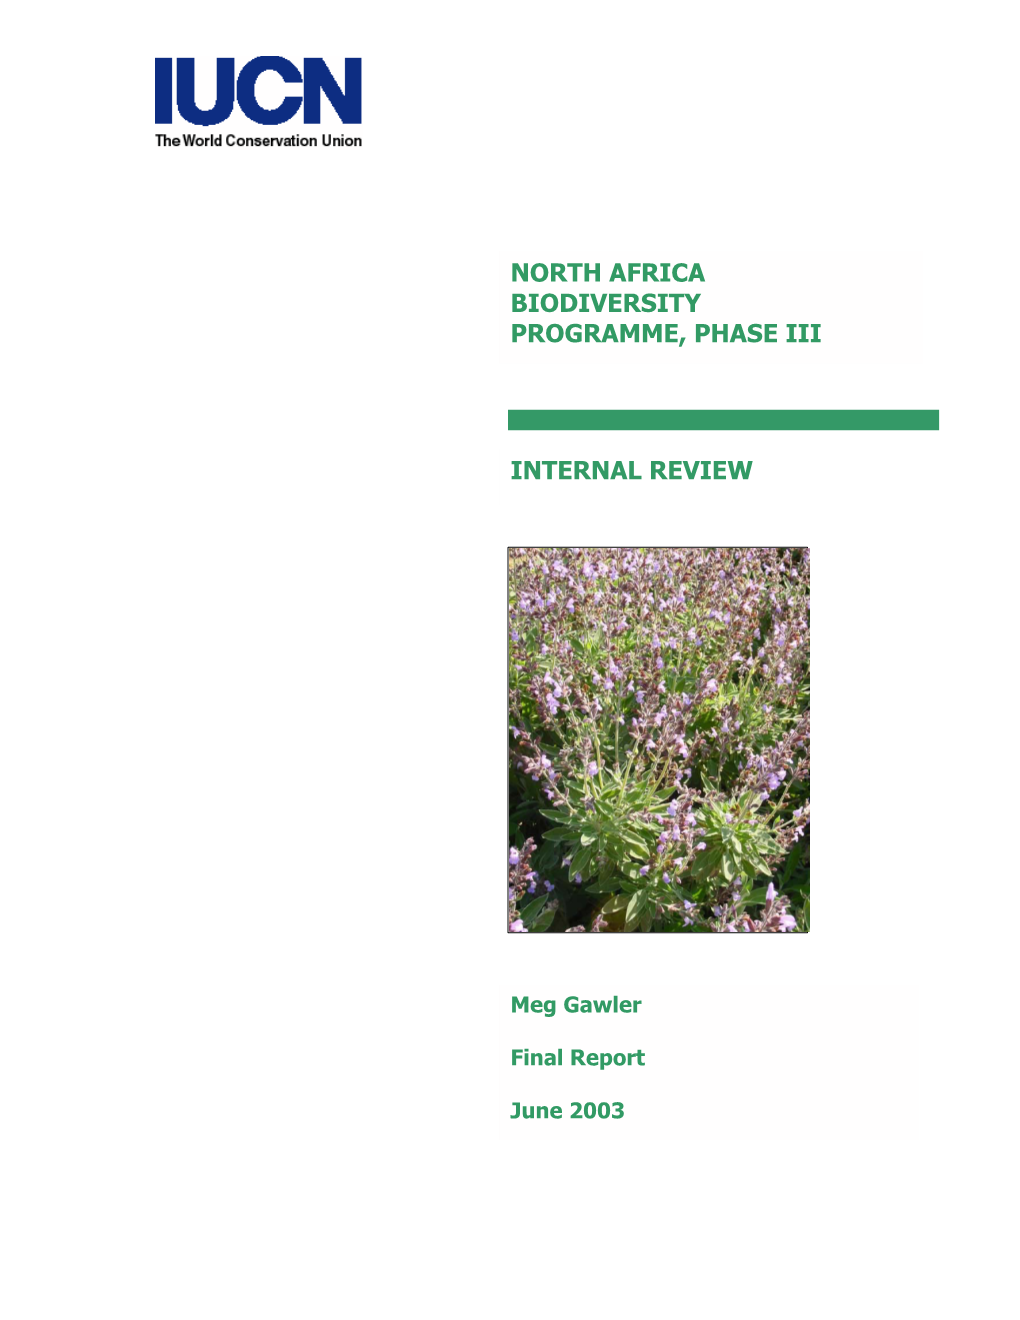 North Africa Biodiversity Programme Phase III: Internal Review